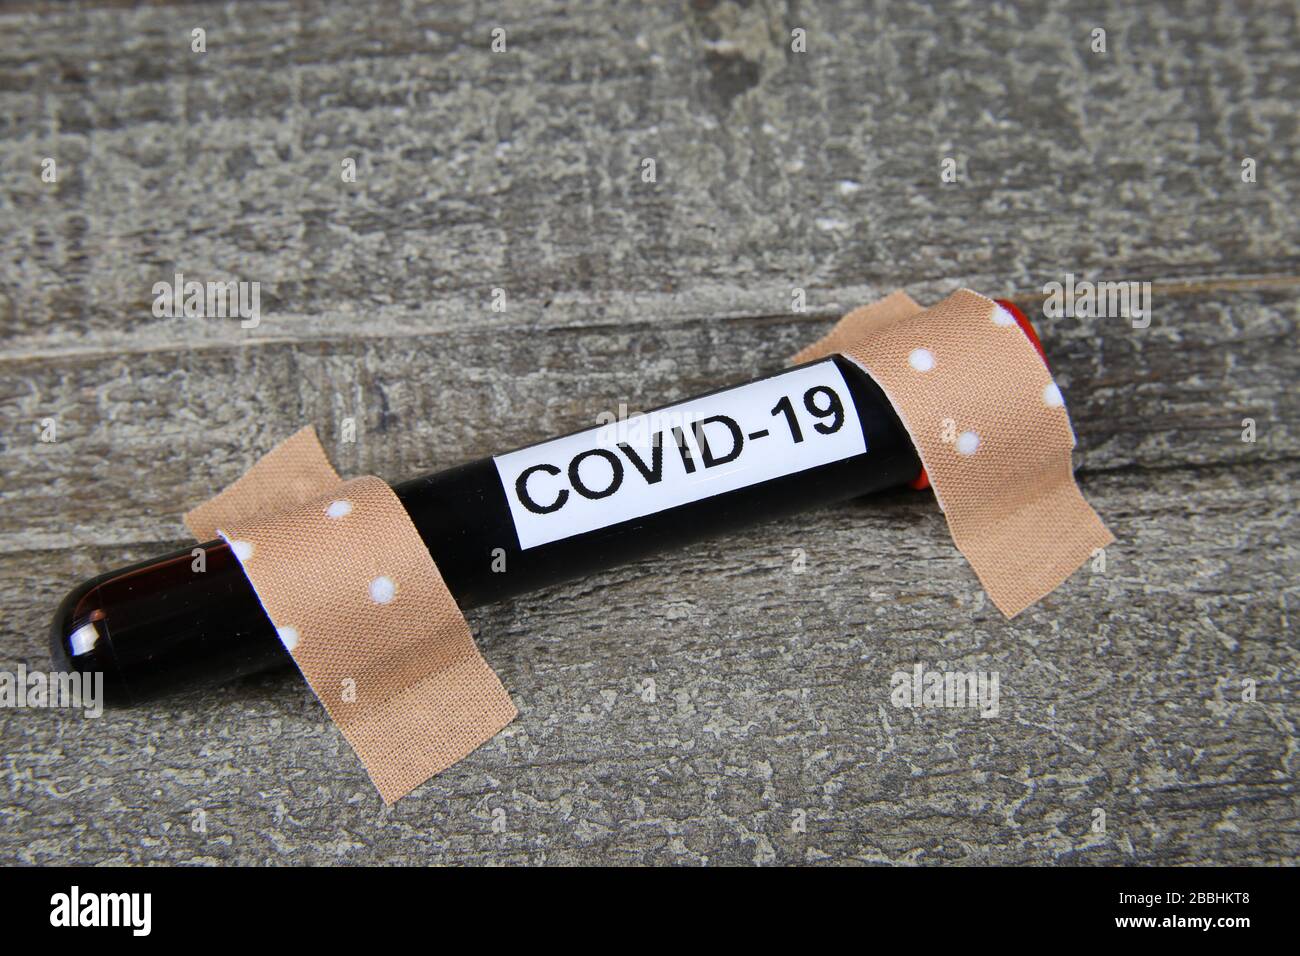 Containing and treatment corona virus epidemic contagion risk concept: Close up of covid-19 blood sample vial fixed with wound plasters on wood table Stock Photo